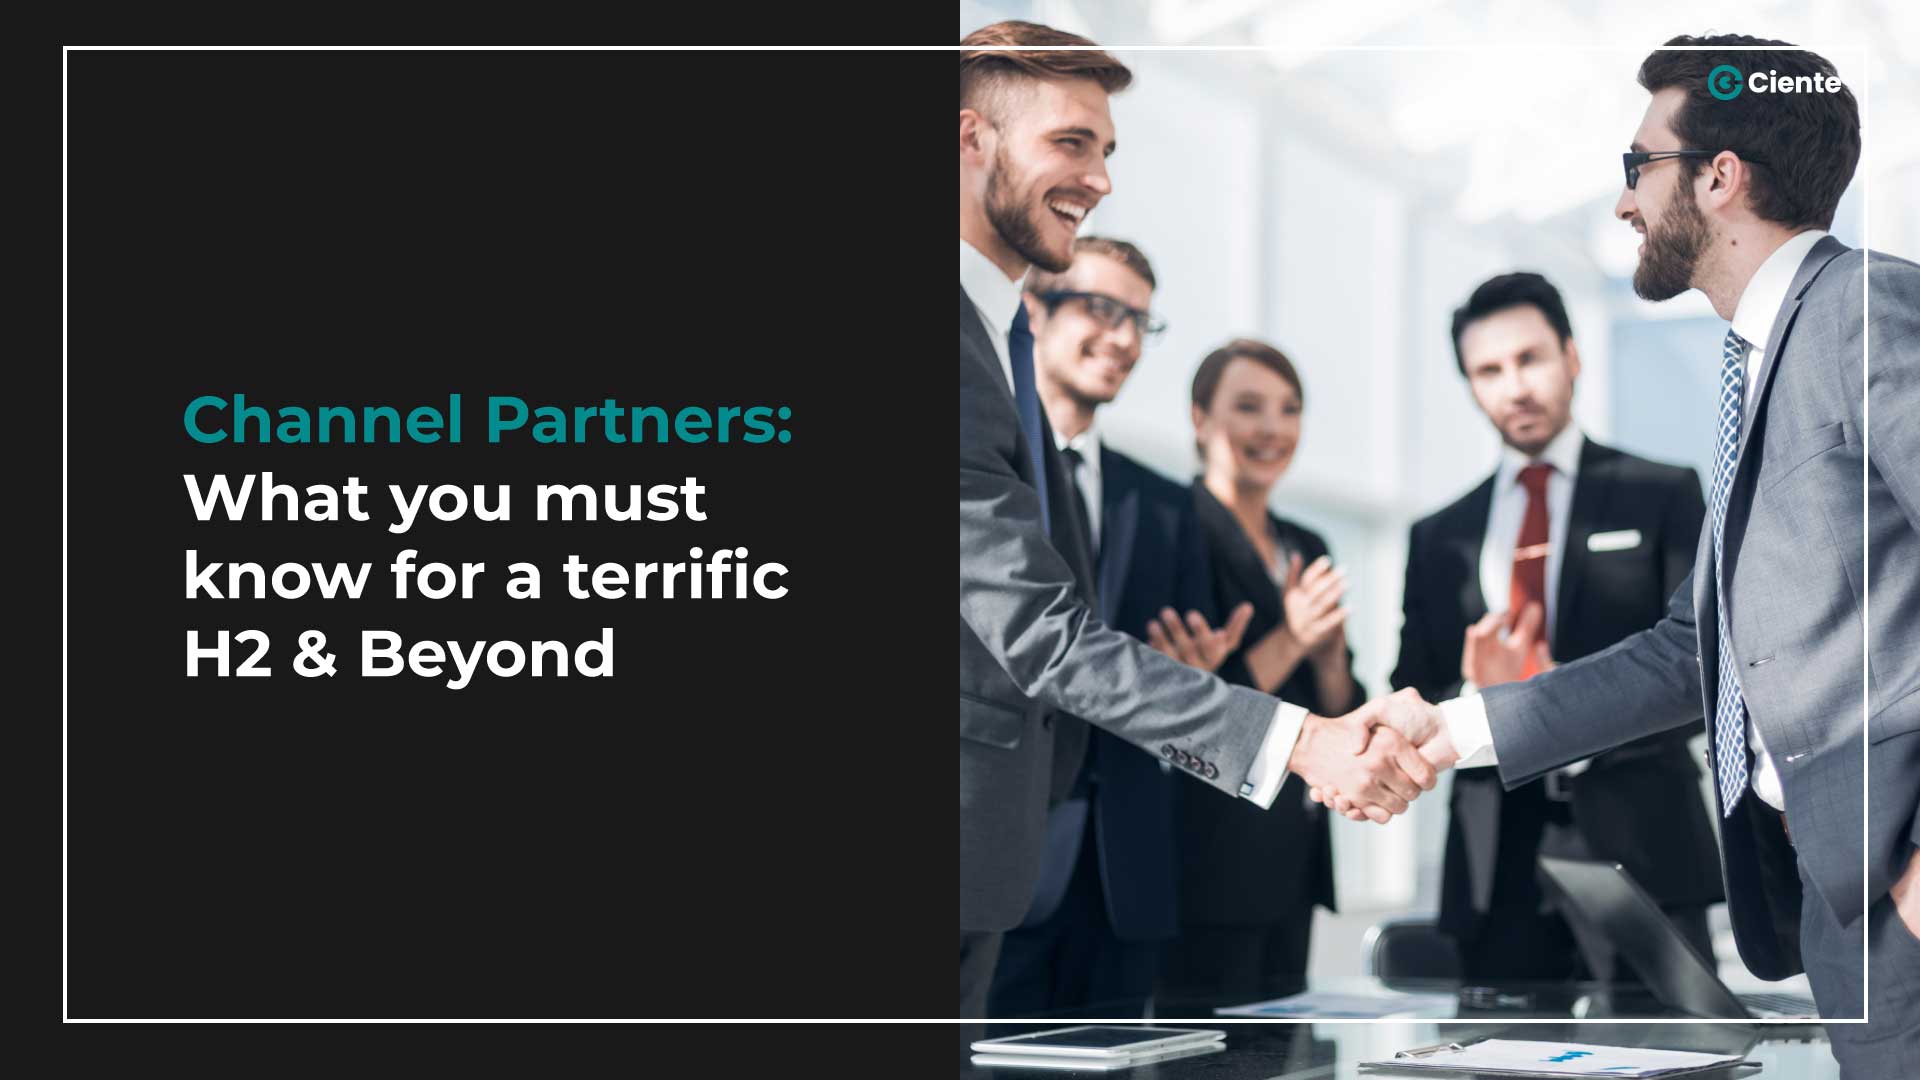 Channel-Partners-What-you-must-know-for-a-terrific-H2-Beyond